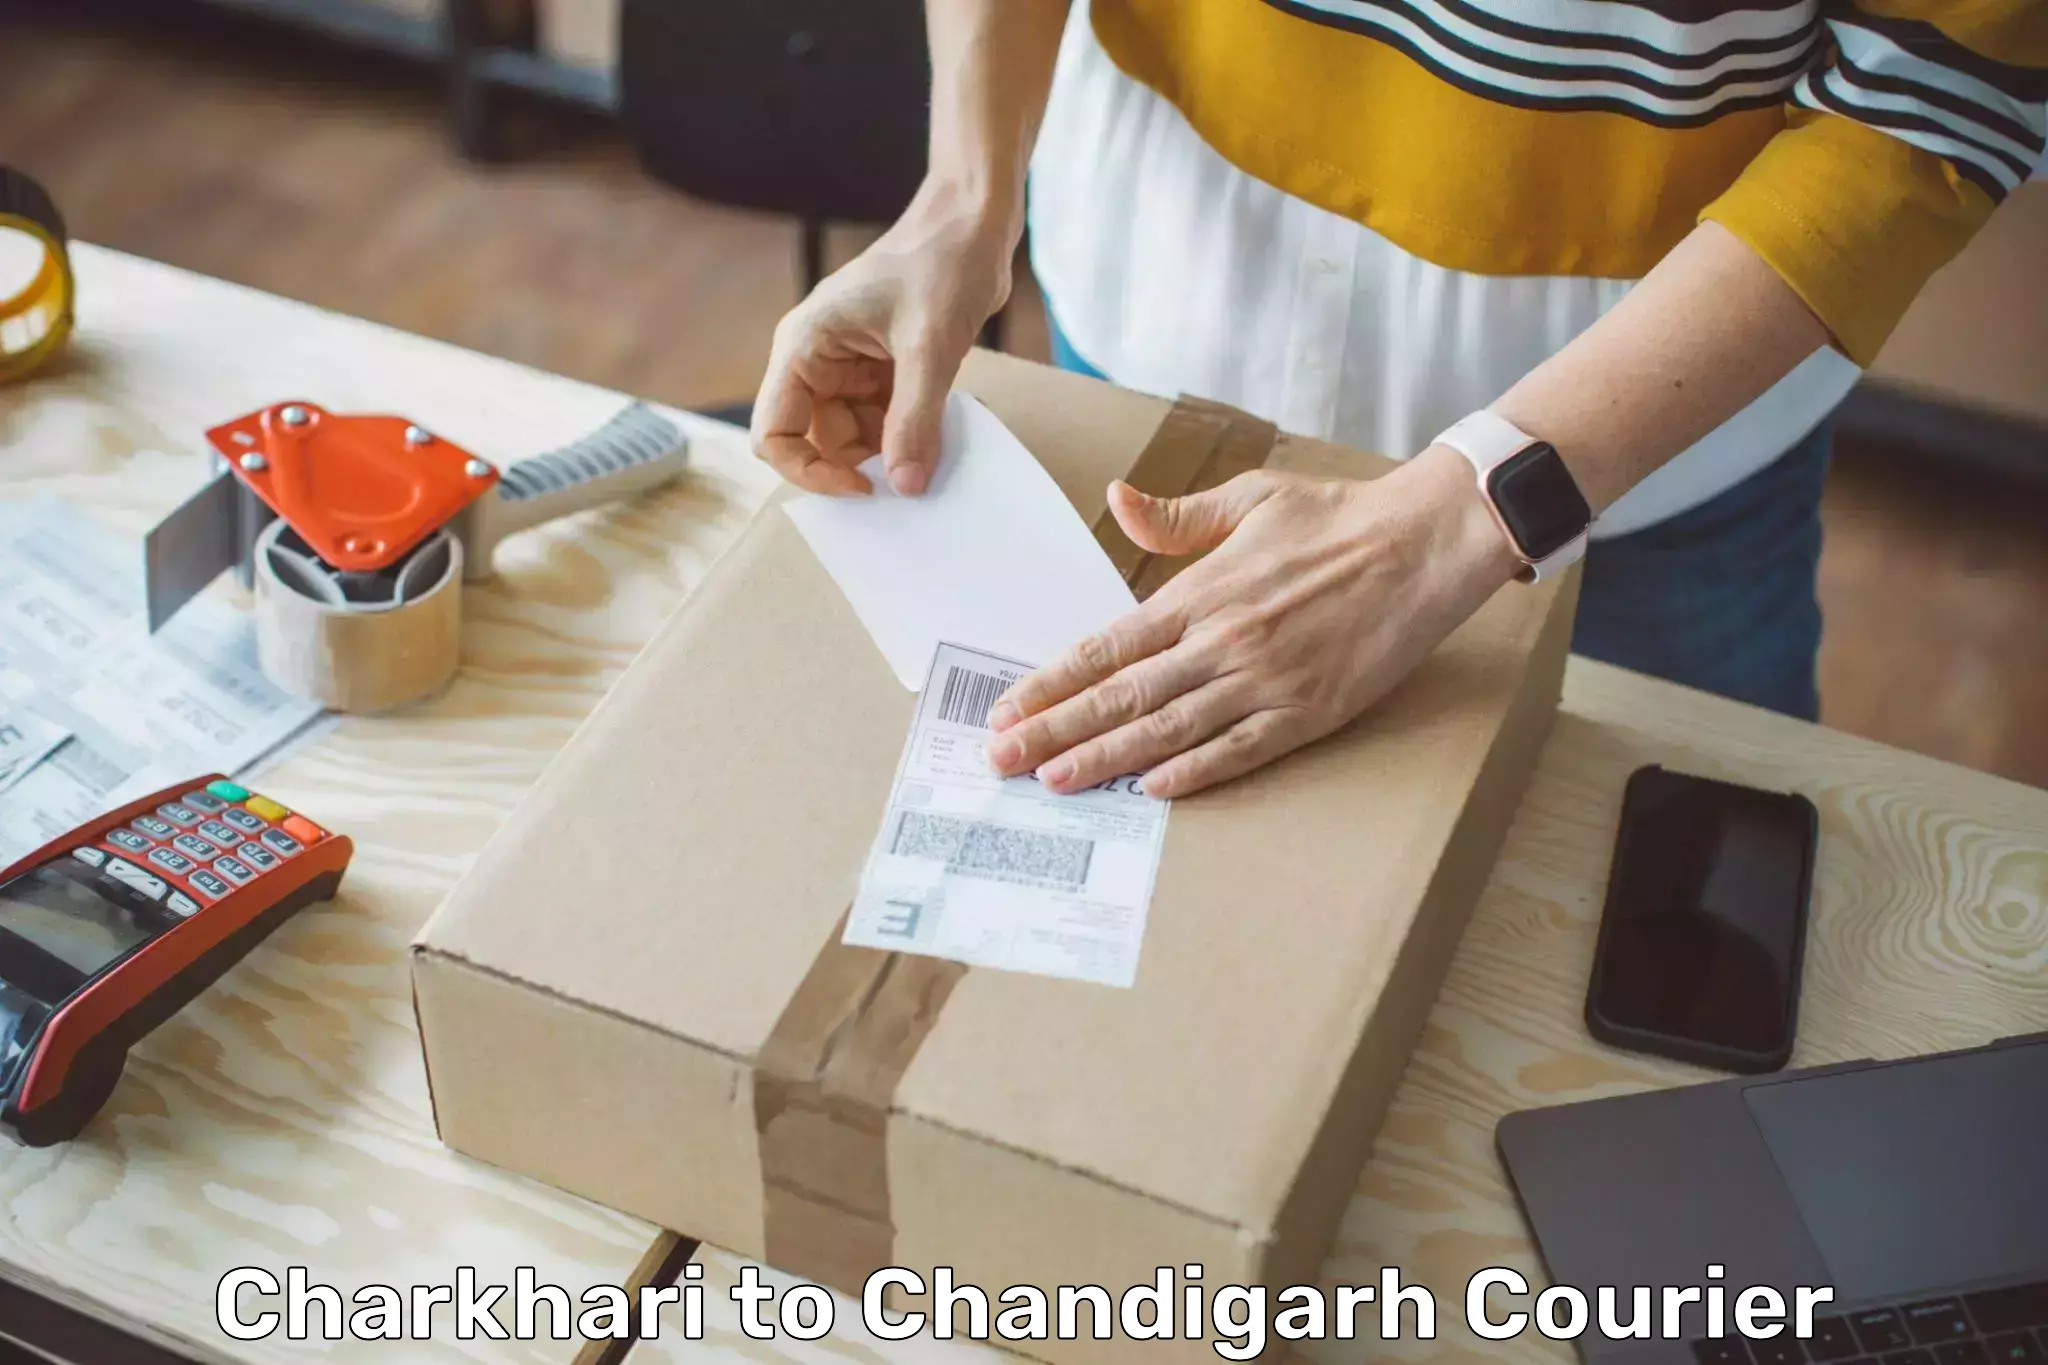 On-call courier service Charkhari to Chandigarh